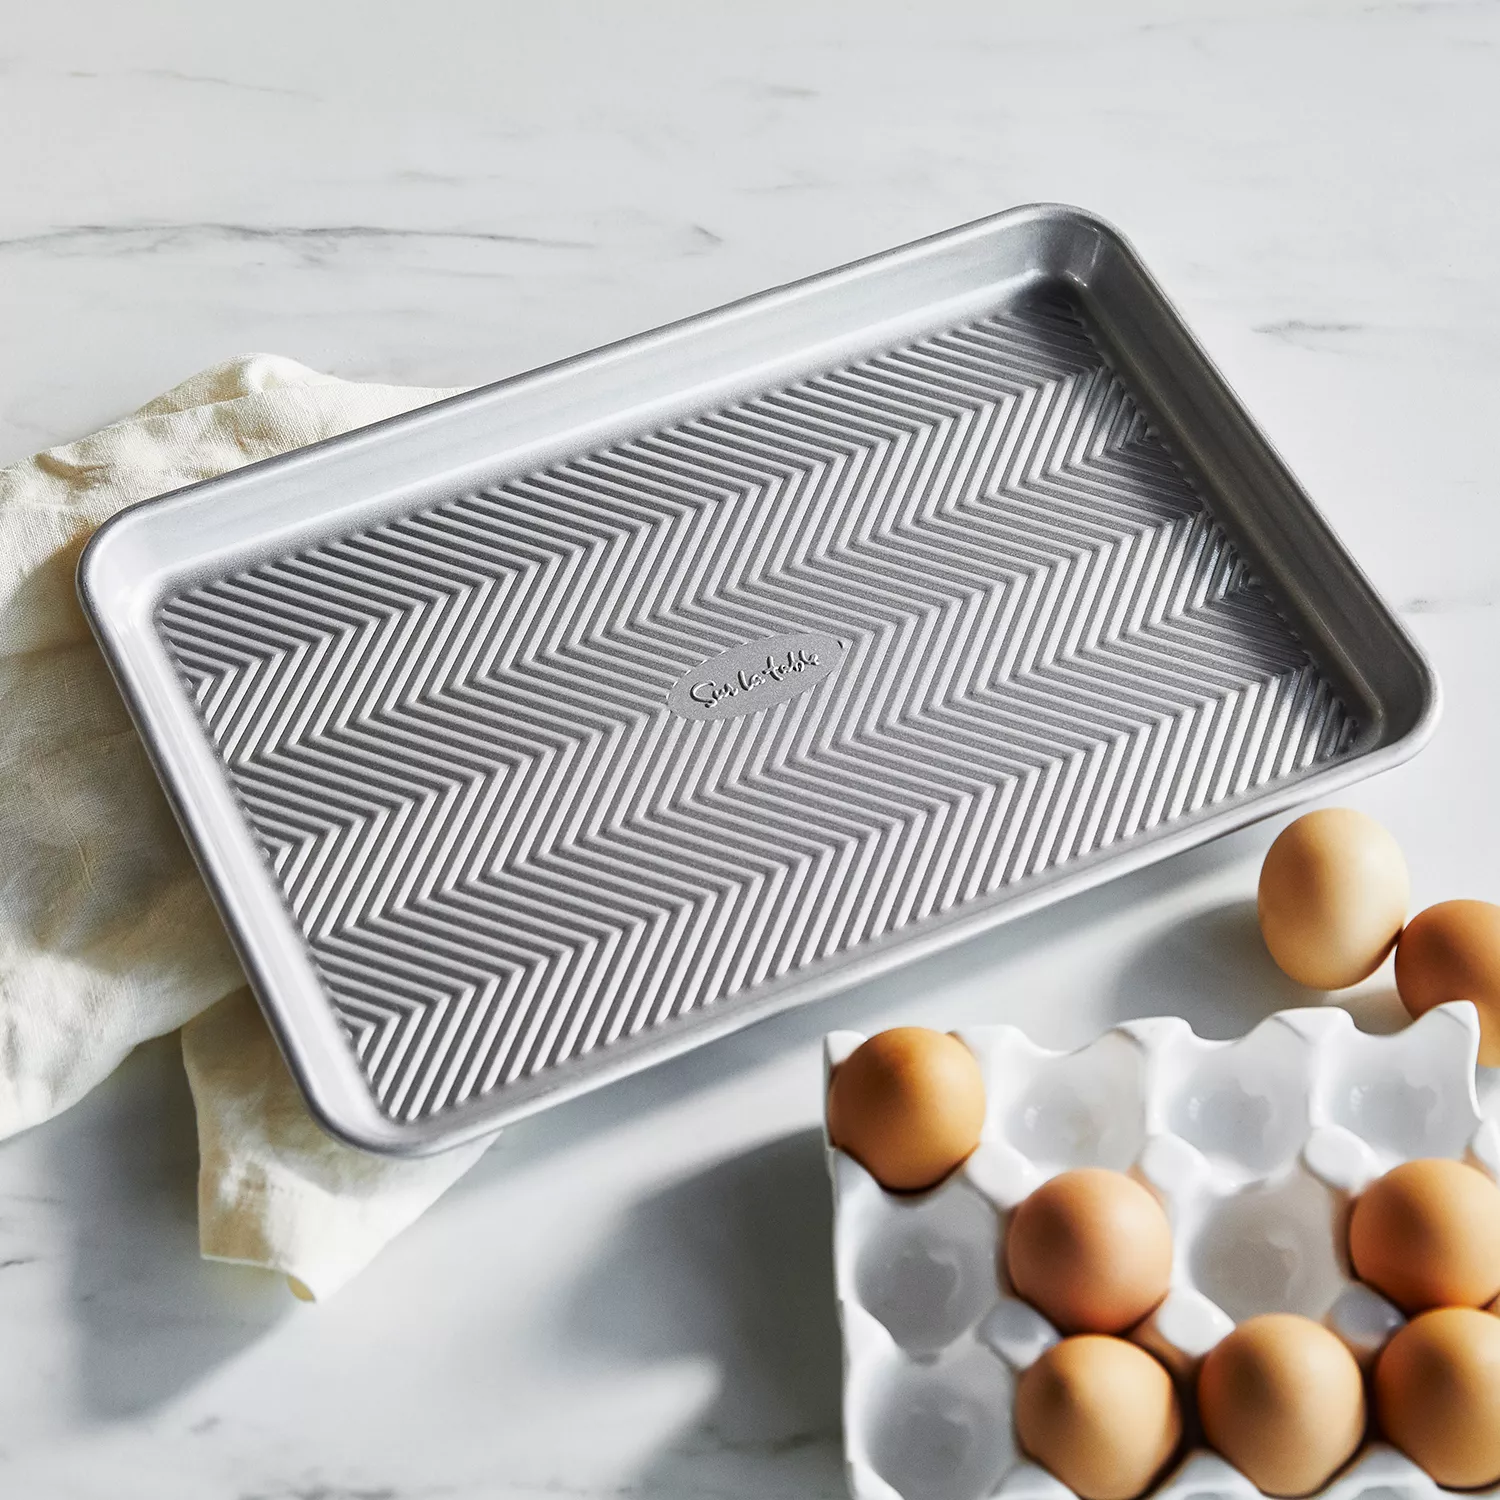 Perforated Jelly Roll Pan (10x15) - Sweet Baking Supply